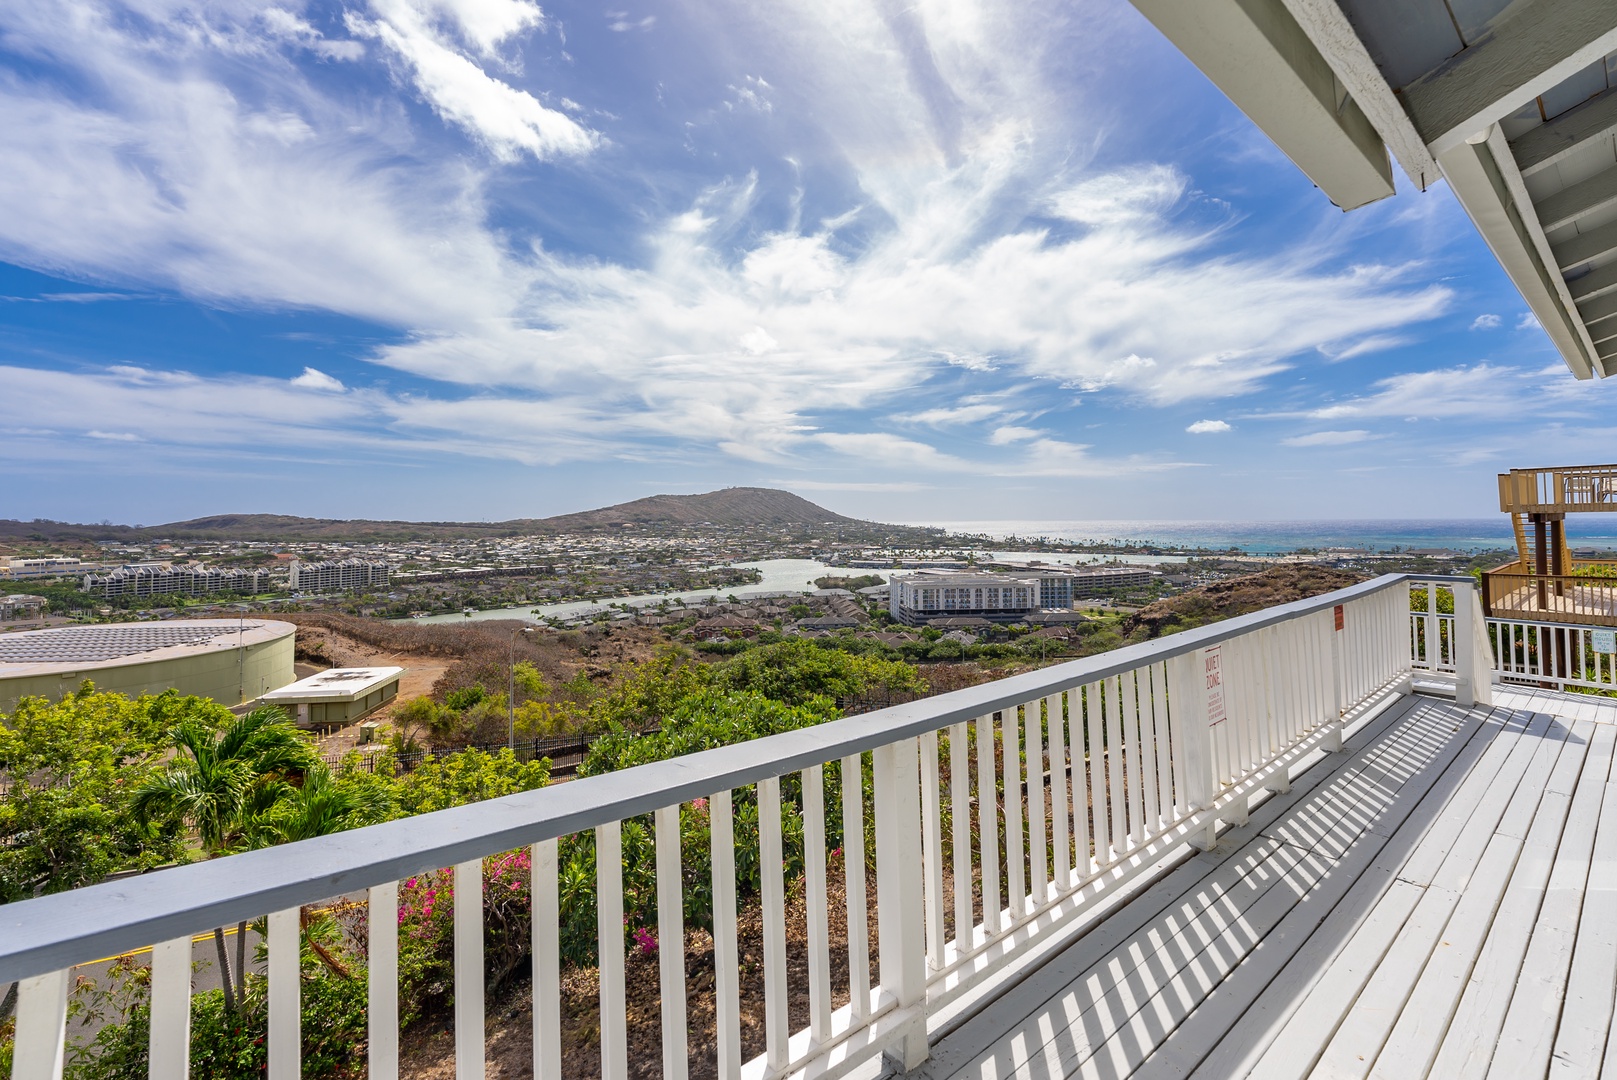 Large lanai with outdoor seating and spectacular views